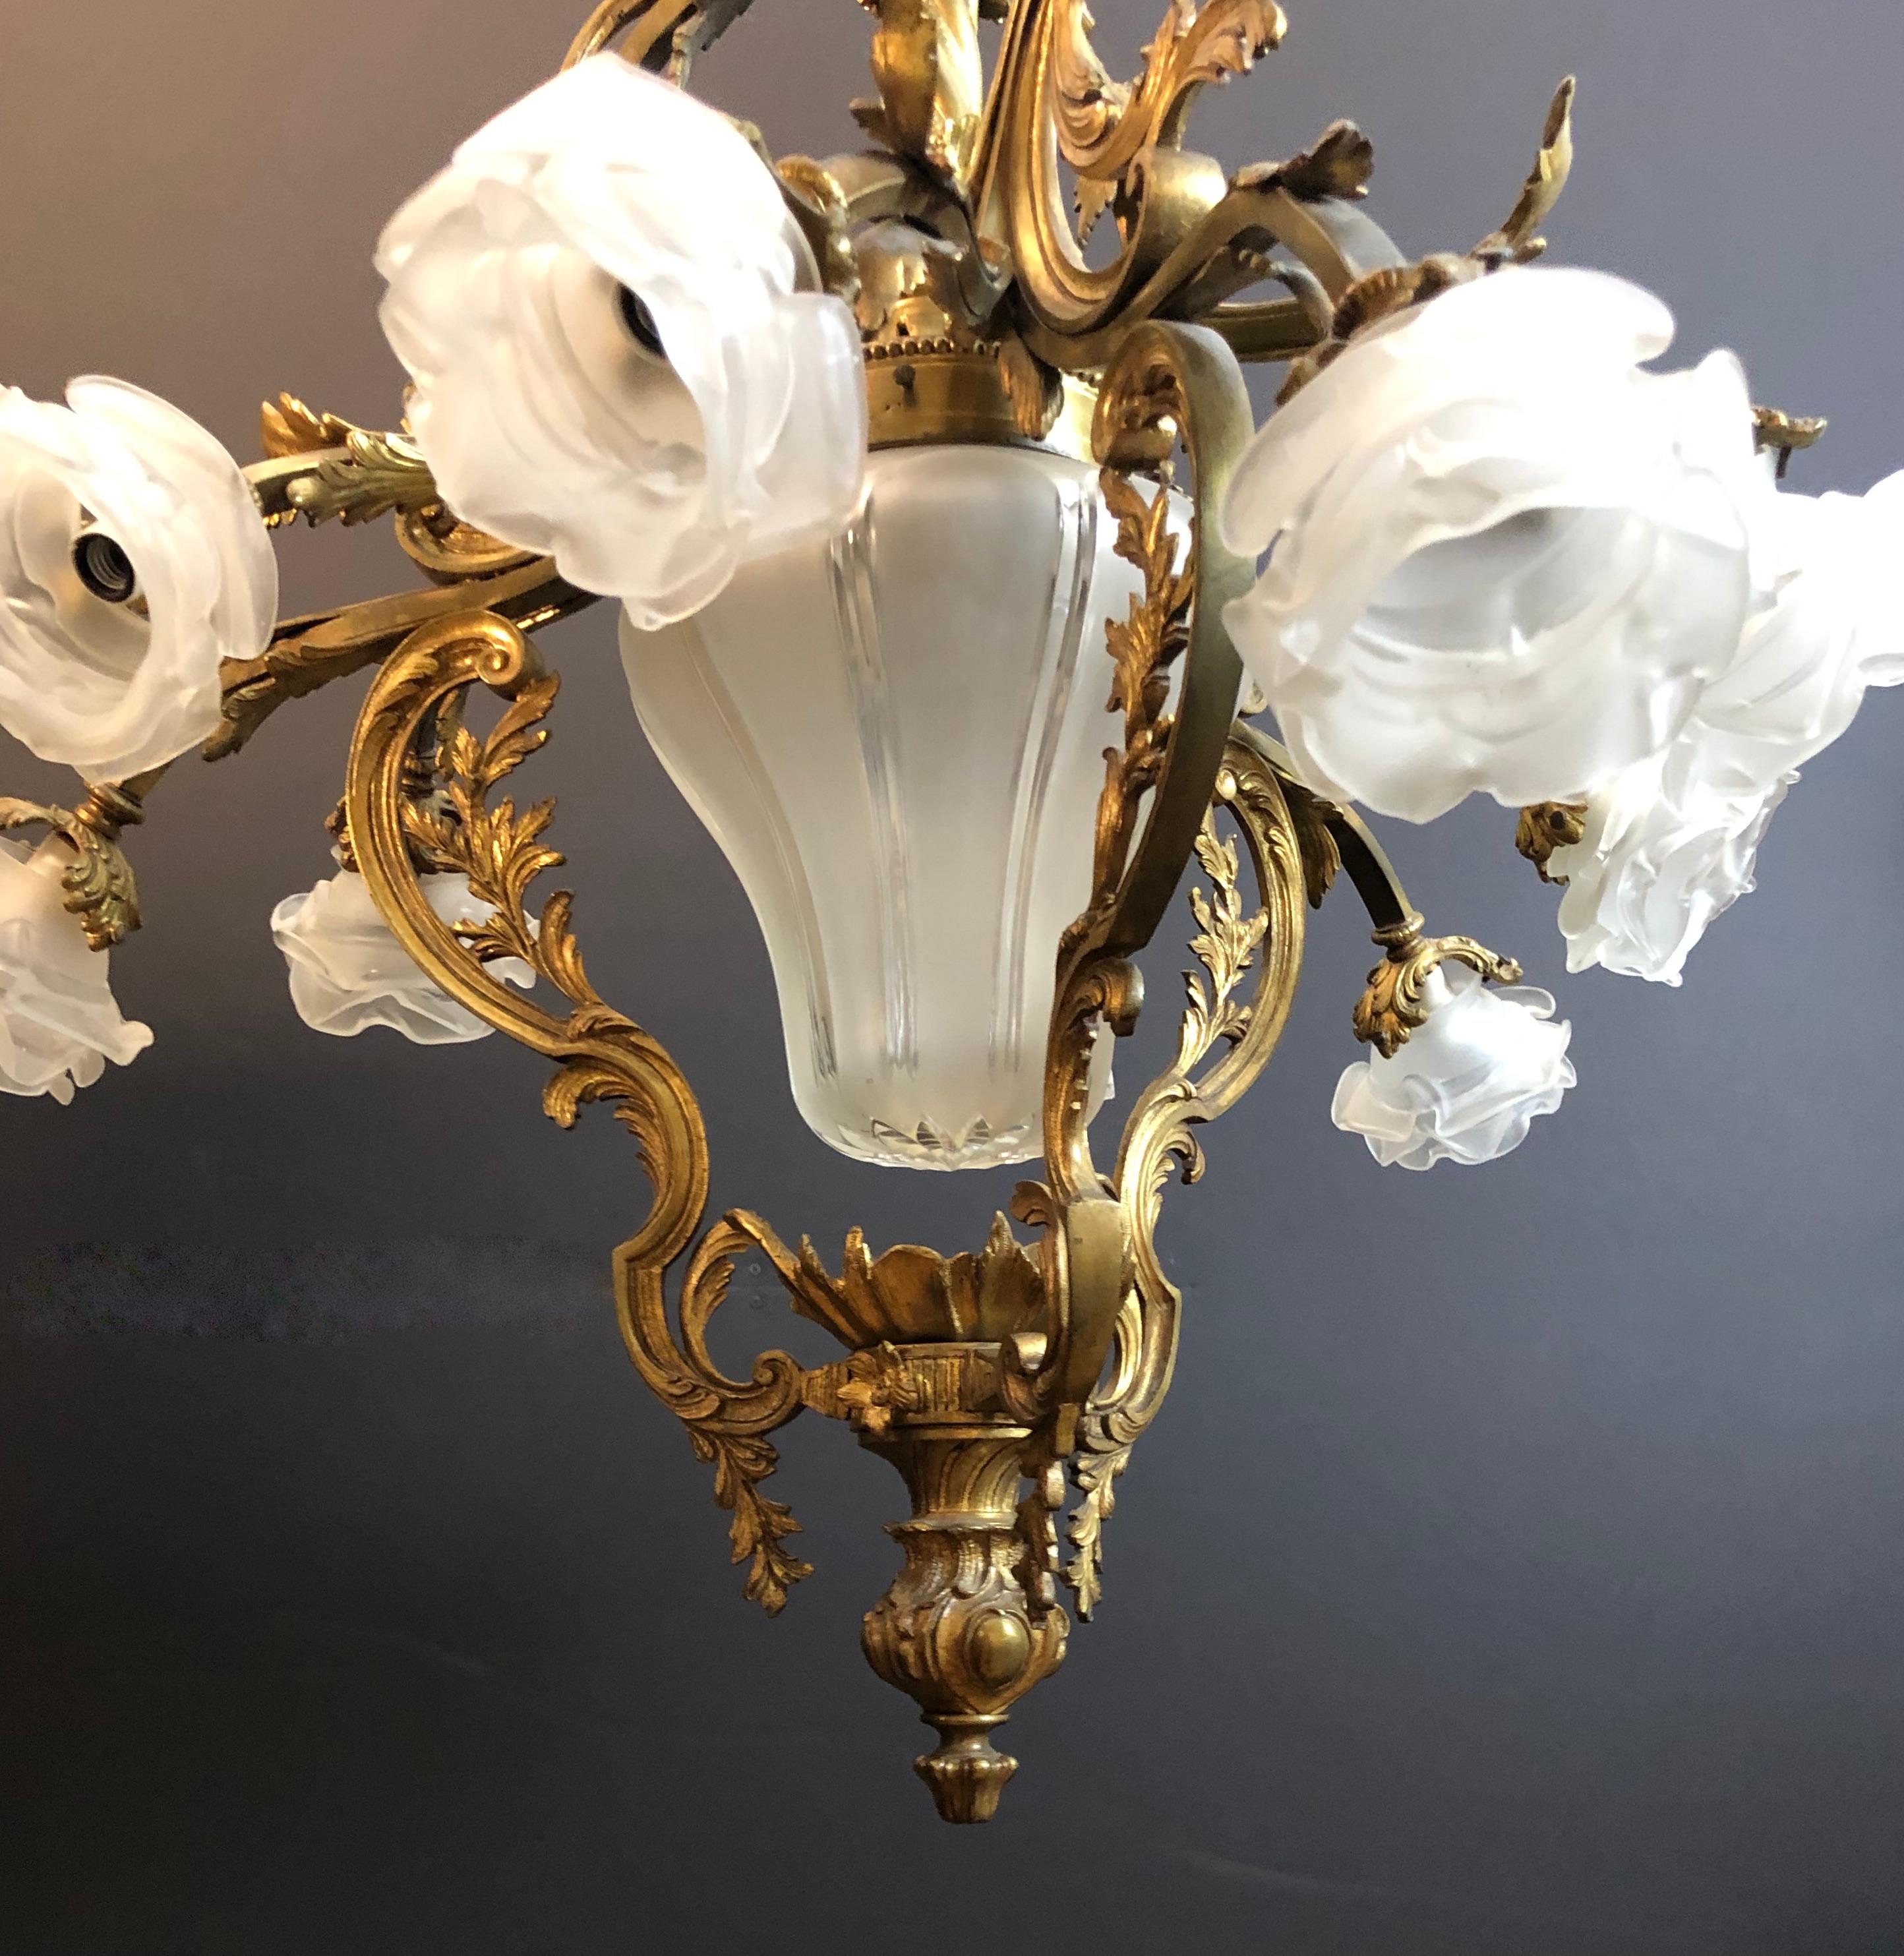 Gilt Bronze Chandelier In The Louis XV Style  In Good Condition For Sale In Norwood, NJ